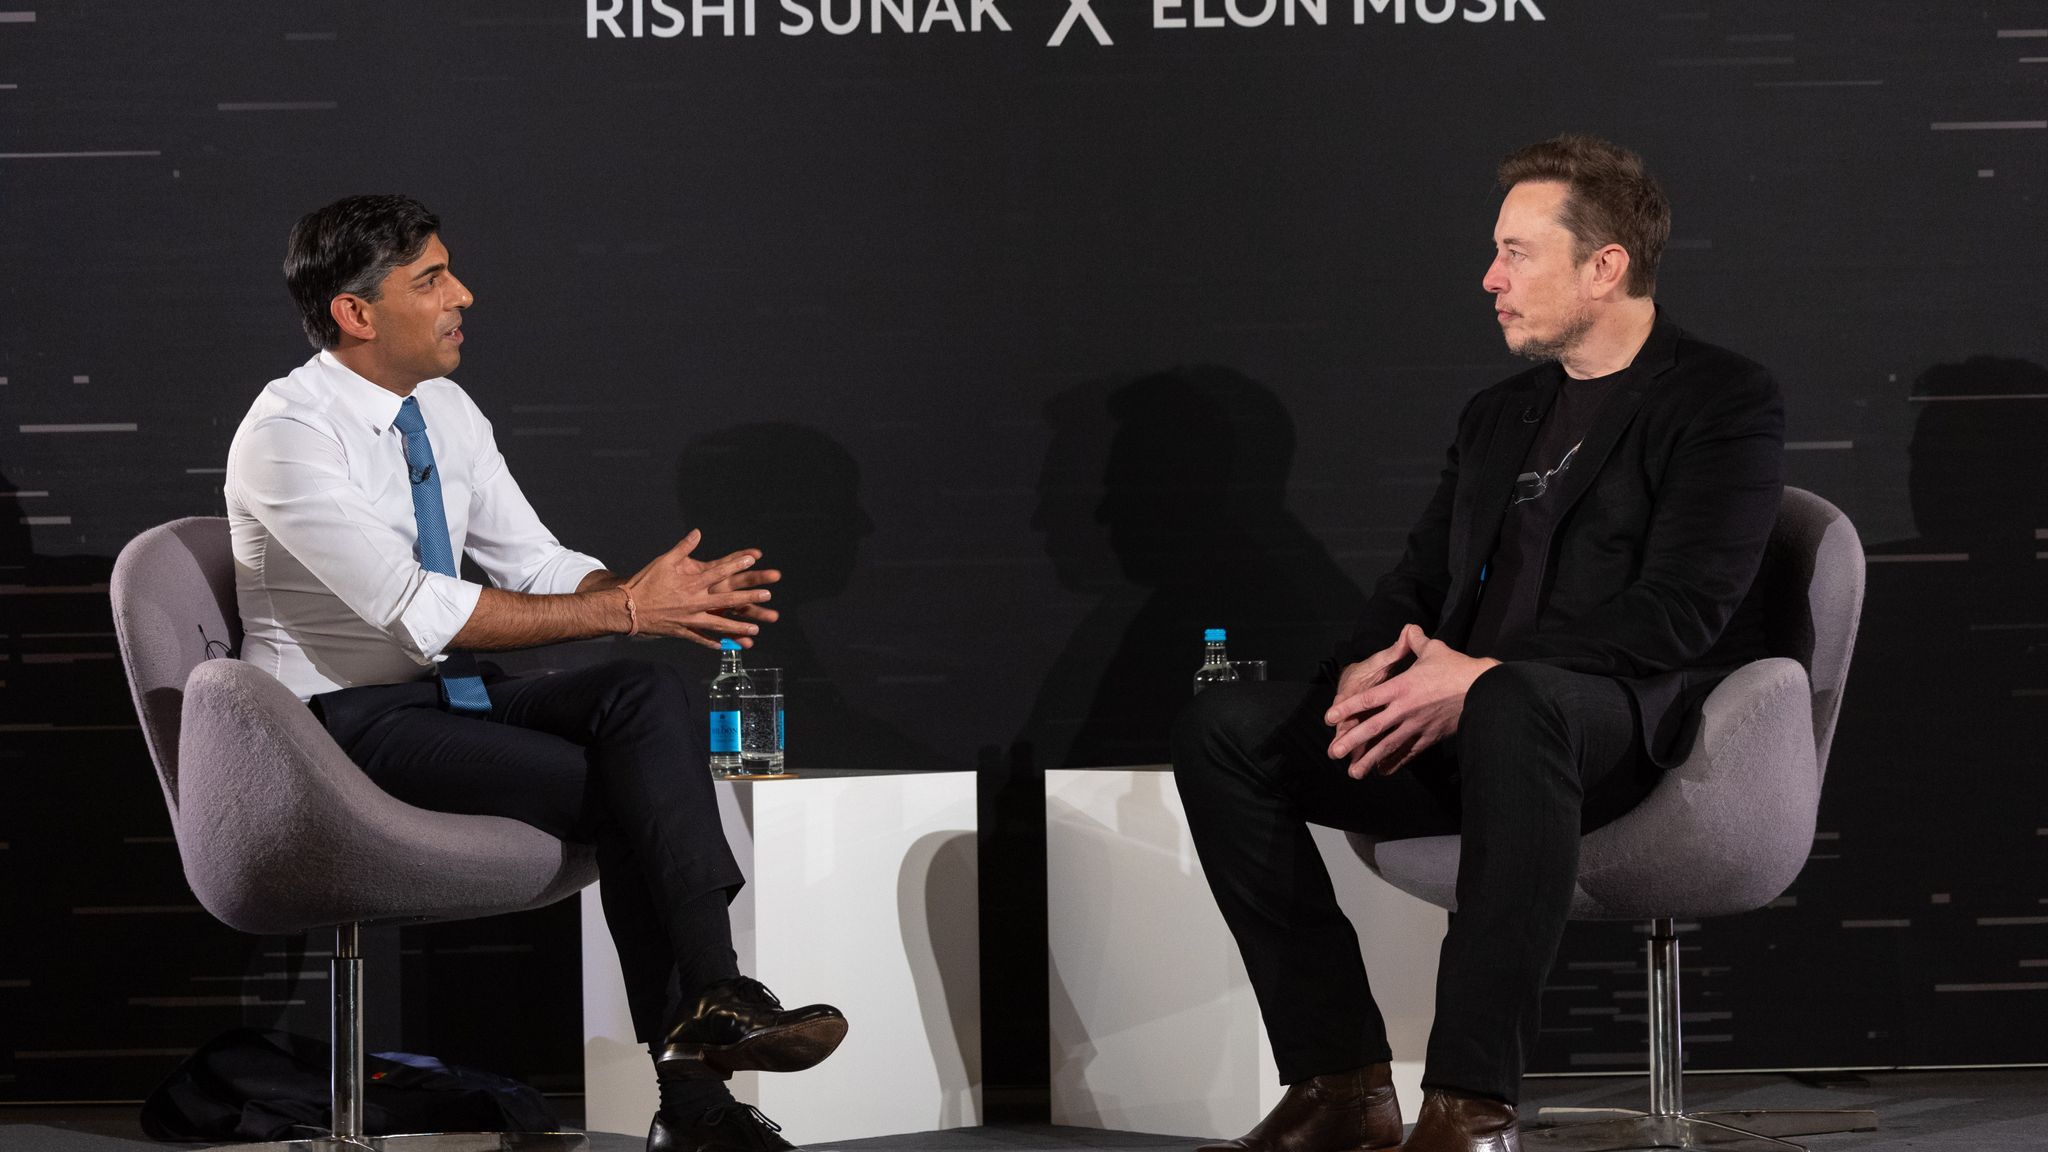 HEAD TO HEAD: Rishi Sunak interviewed Elon Musk at an AI conference designed to boost his flagging fortunes